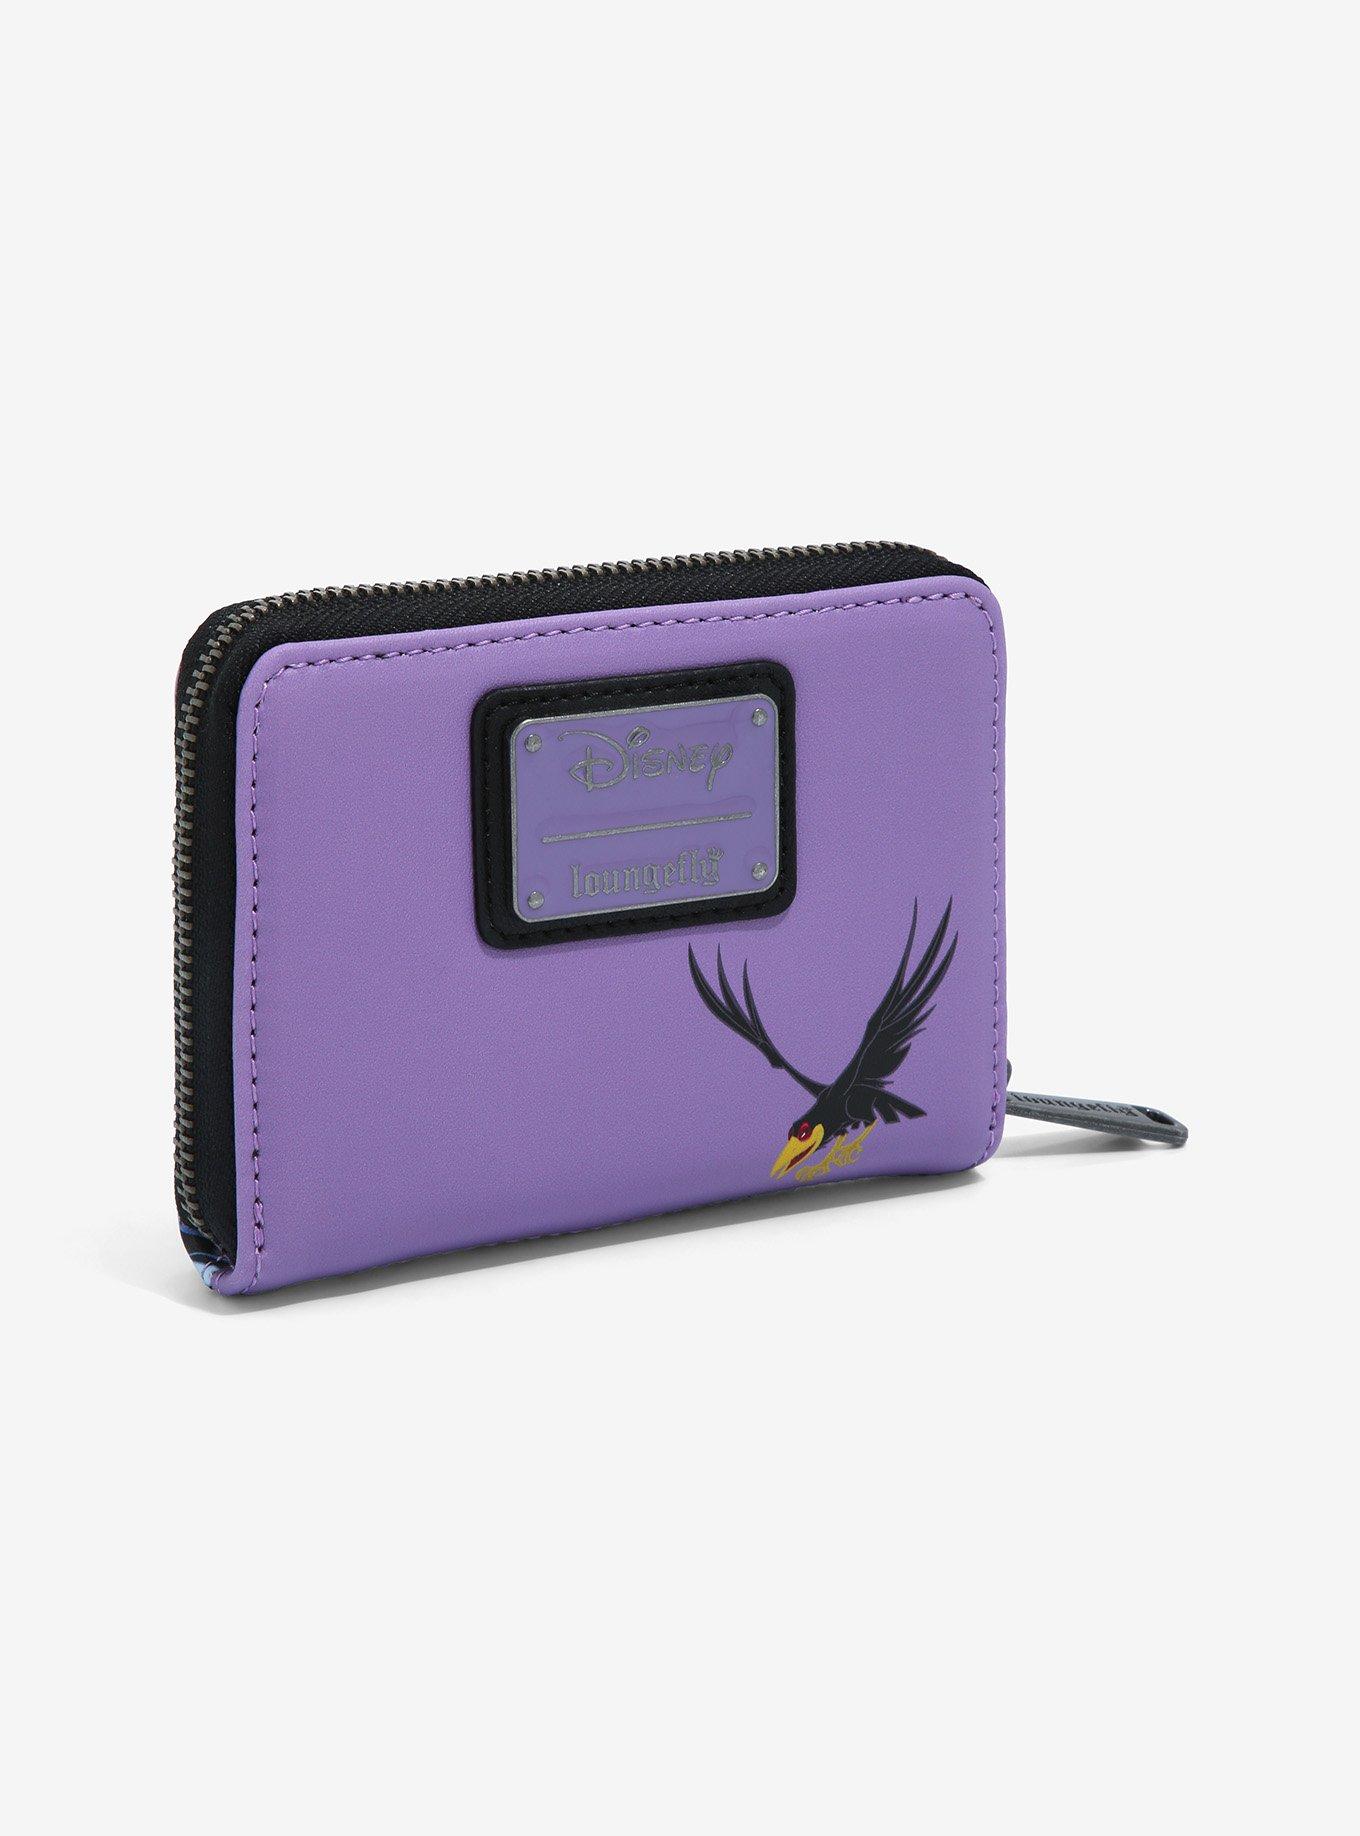 Loungefly Maleficent Purse and Wallet for Sale in Chico, CA - OfferUp